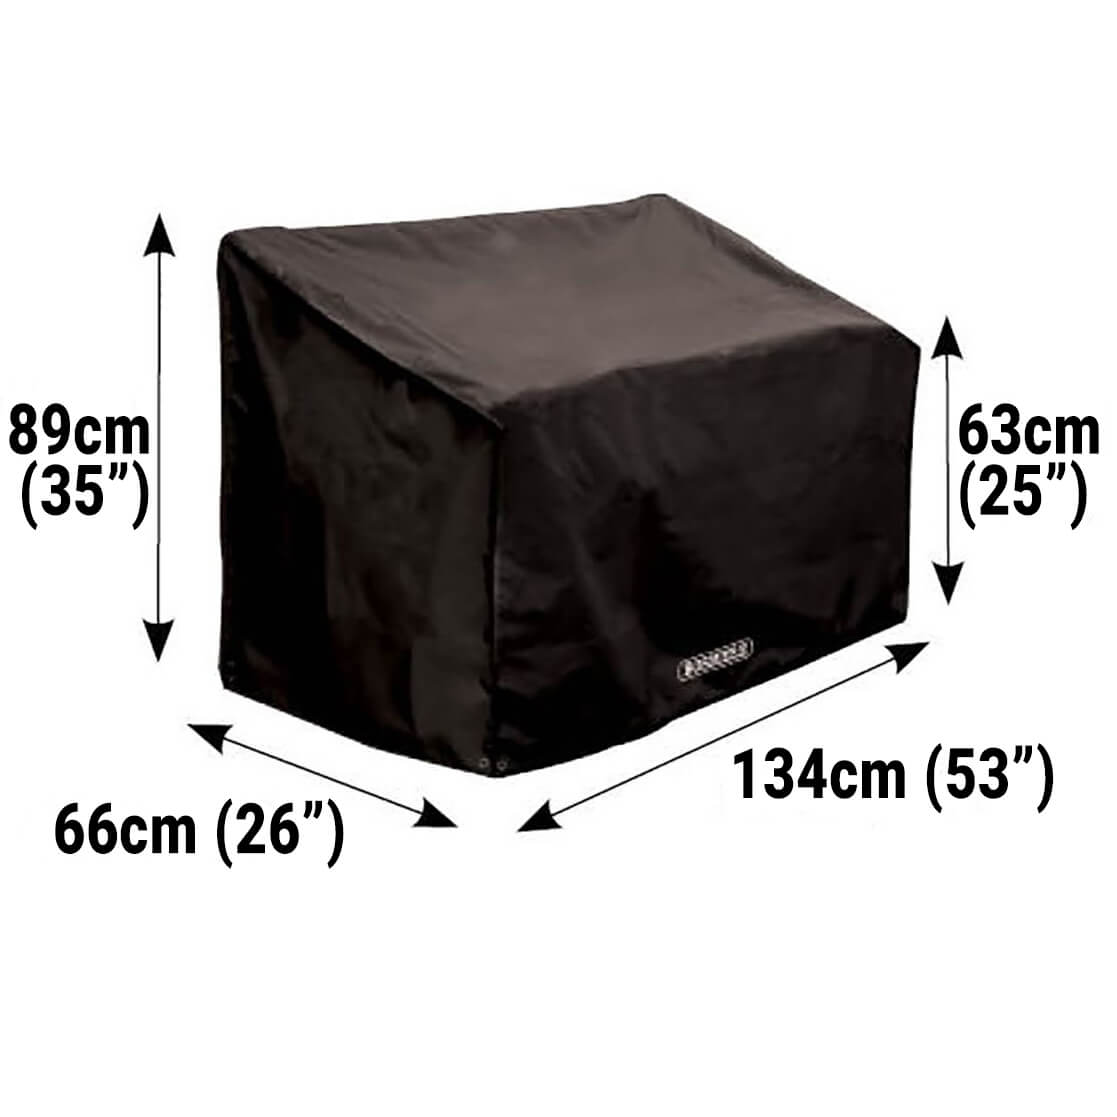 Small Image of Bosmere Protector 6000 2 Seat Bench Cover - D605